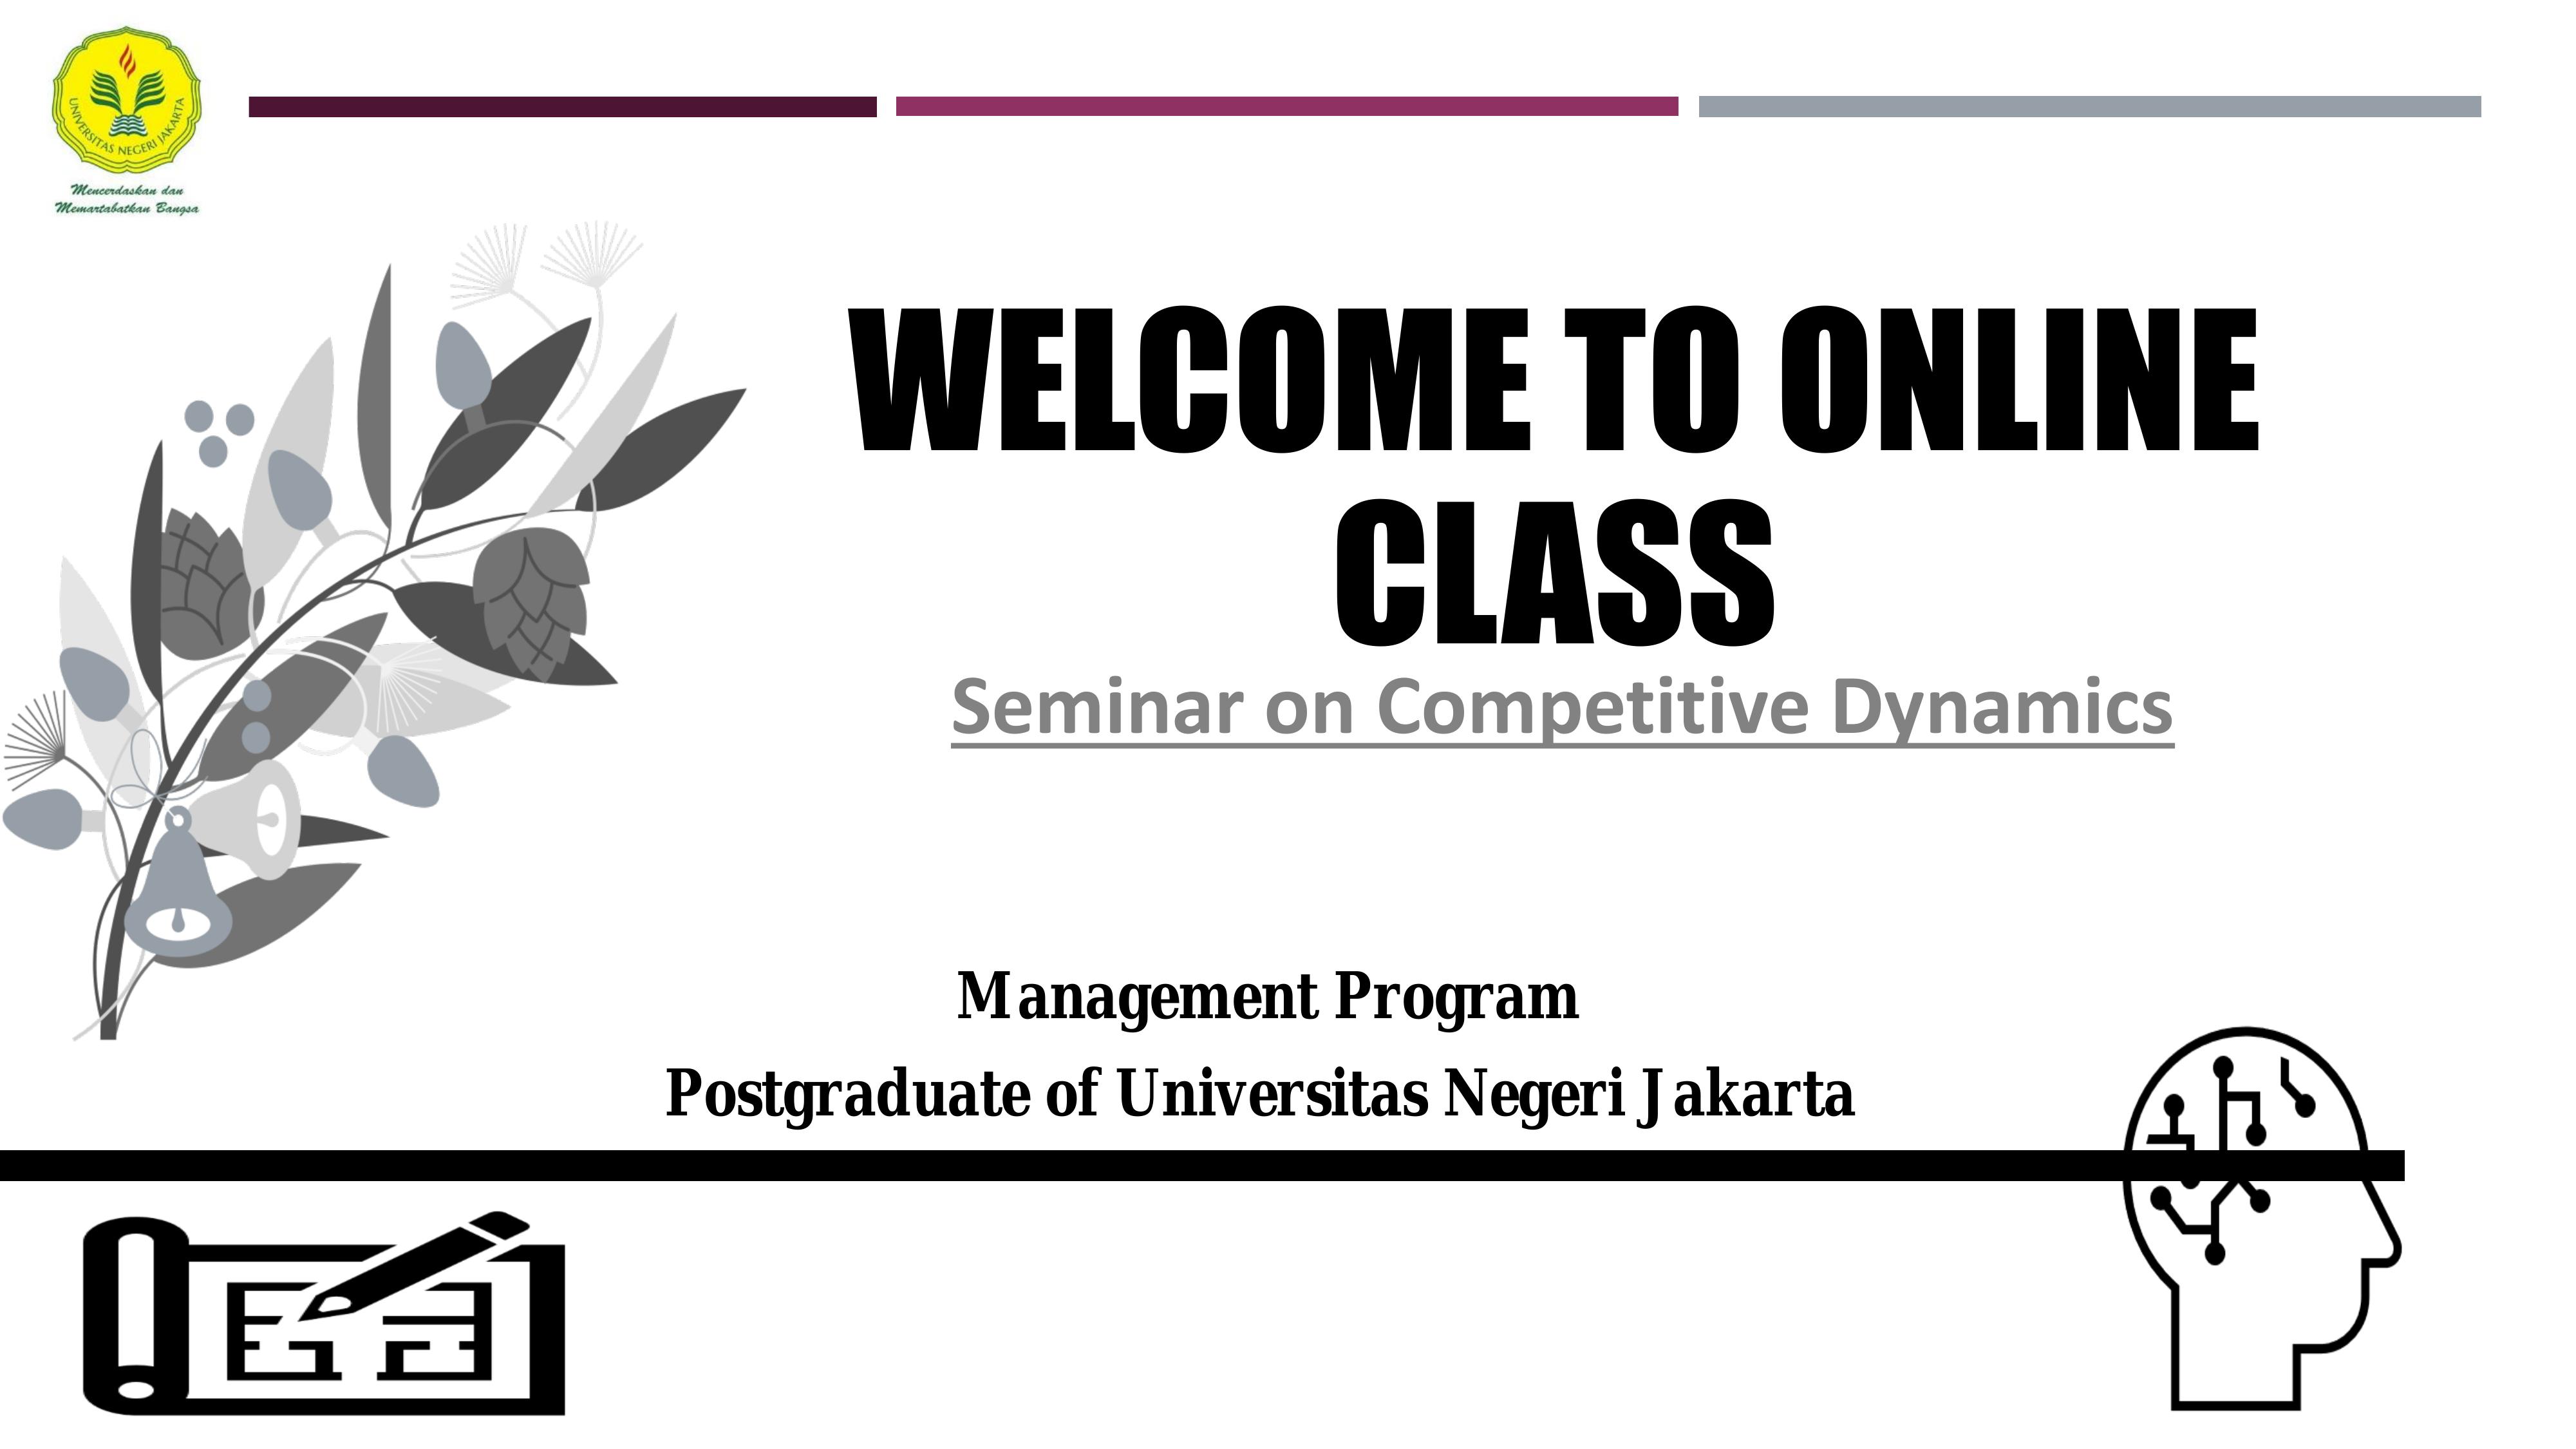 Seminar on Competitive Dynamics